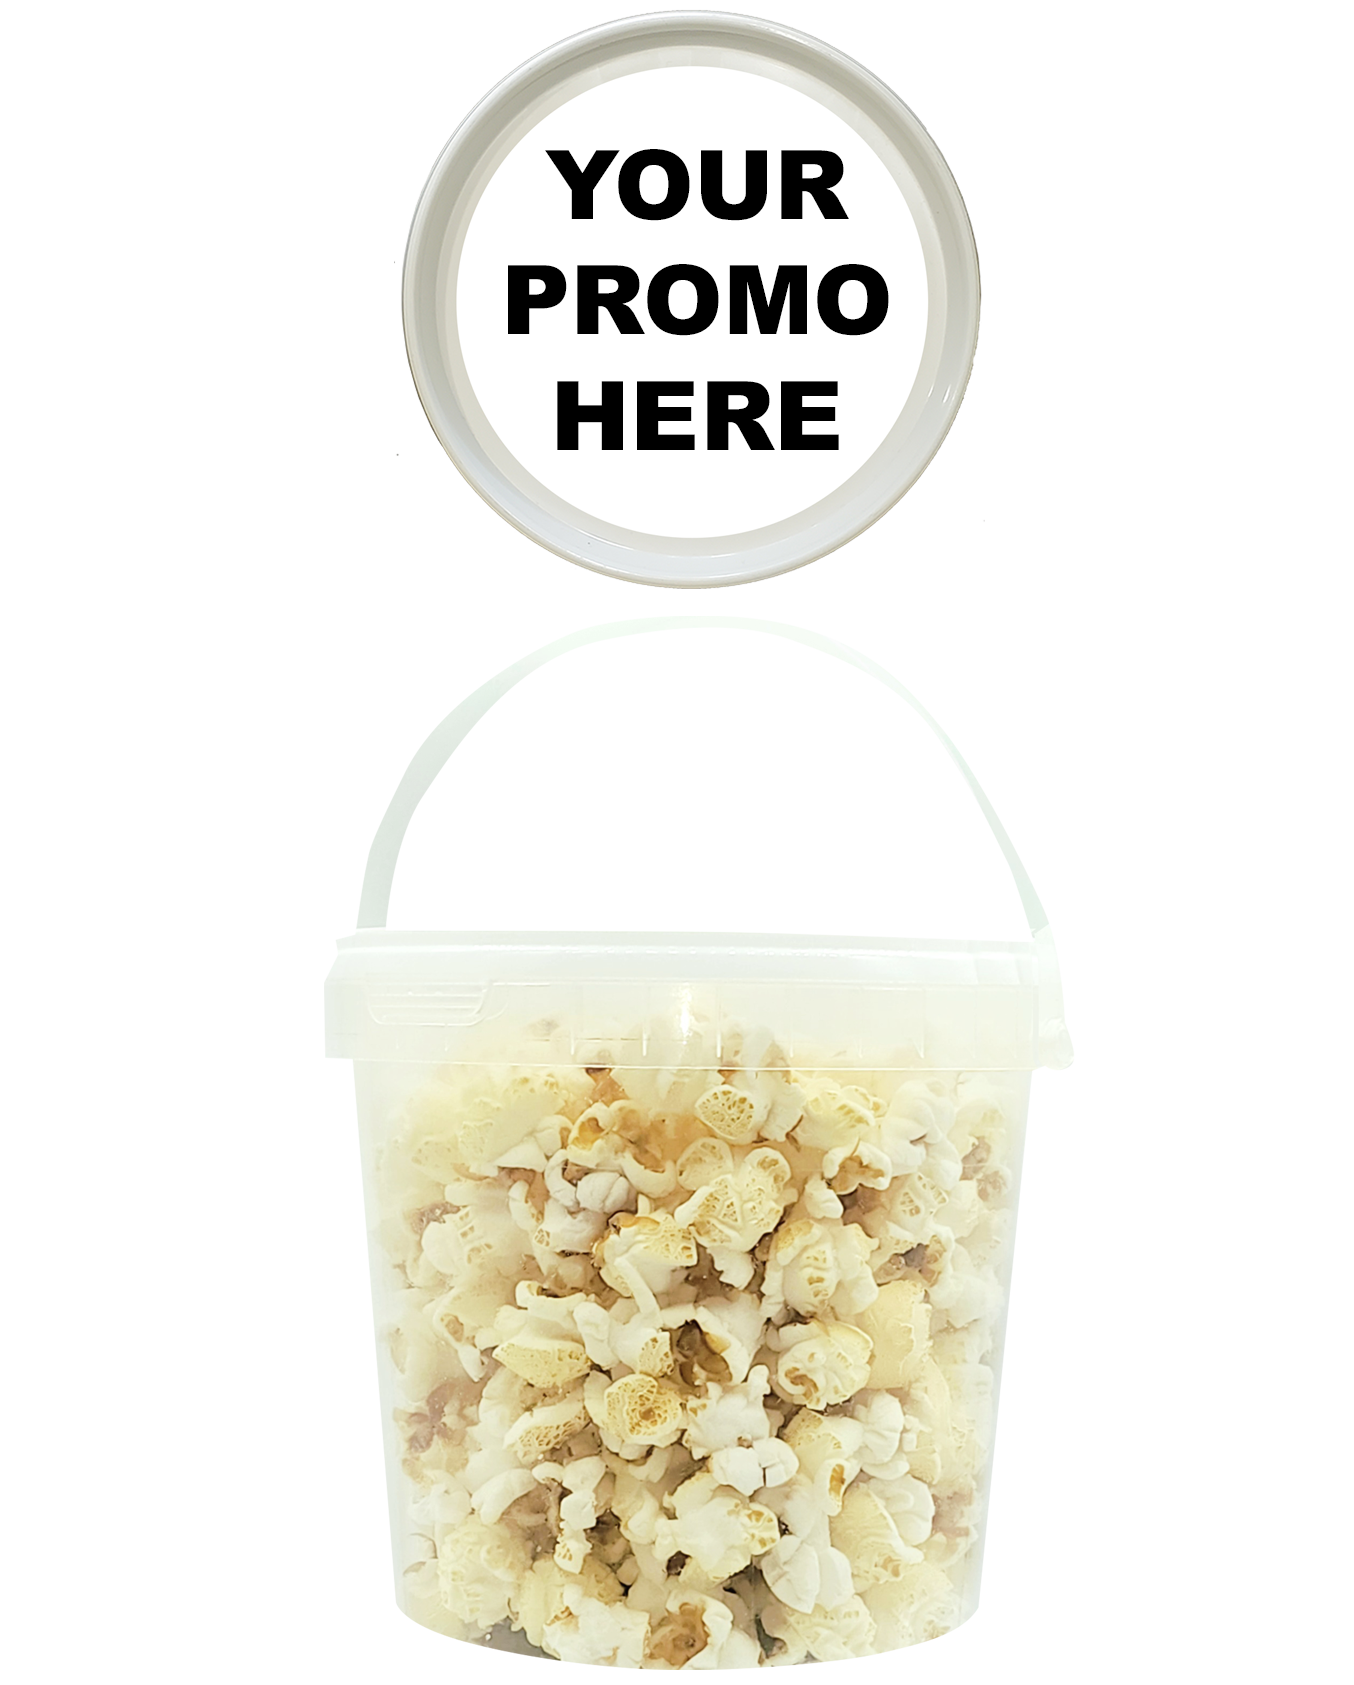 Promo Pop™ - White Cheddar Jumbo (as low as $8.49 per bucket) Case of 12 Price